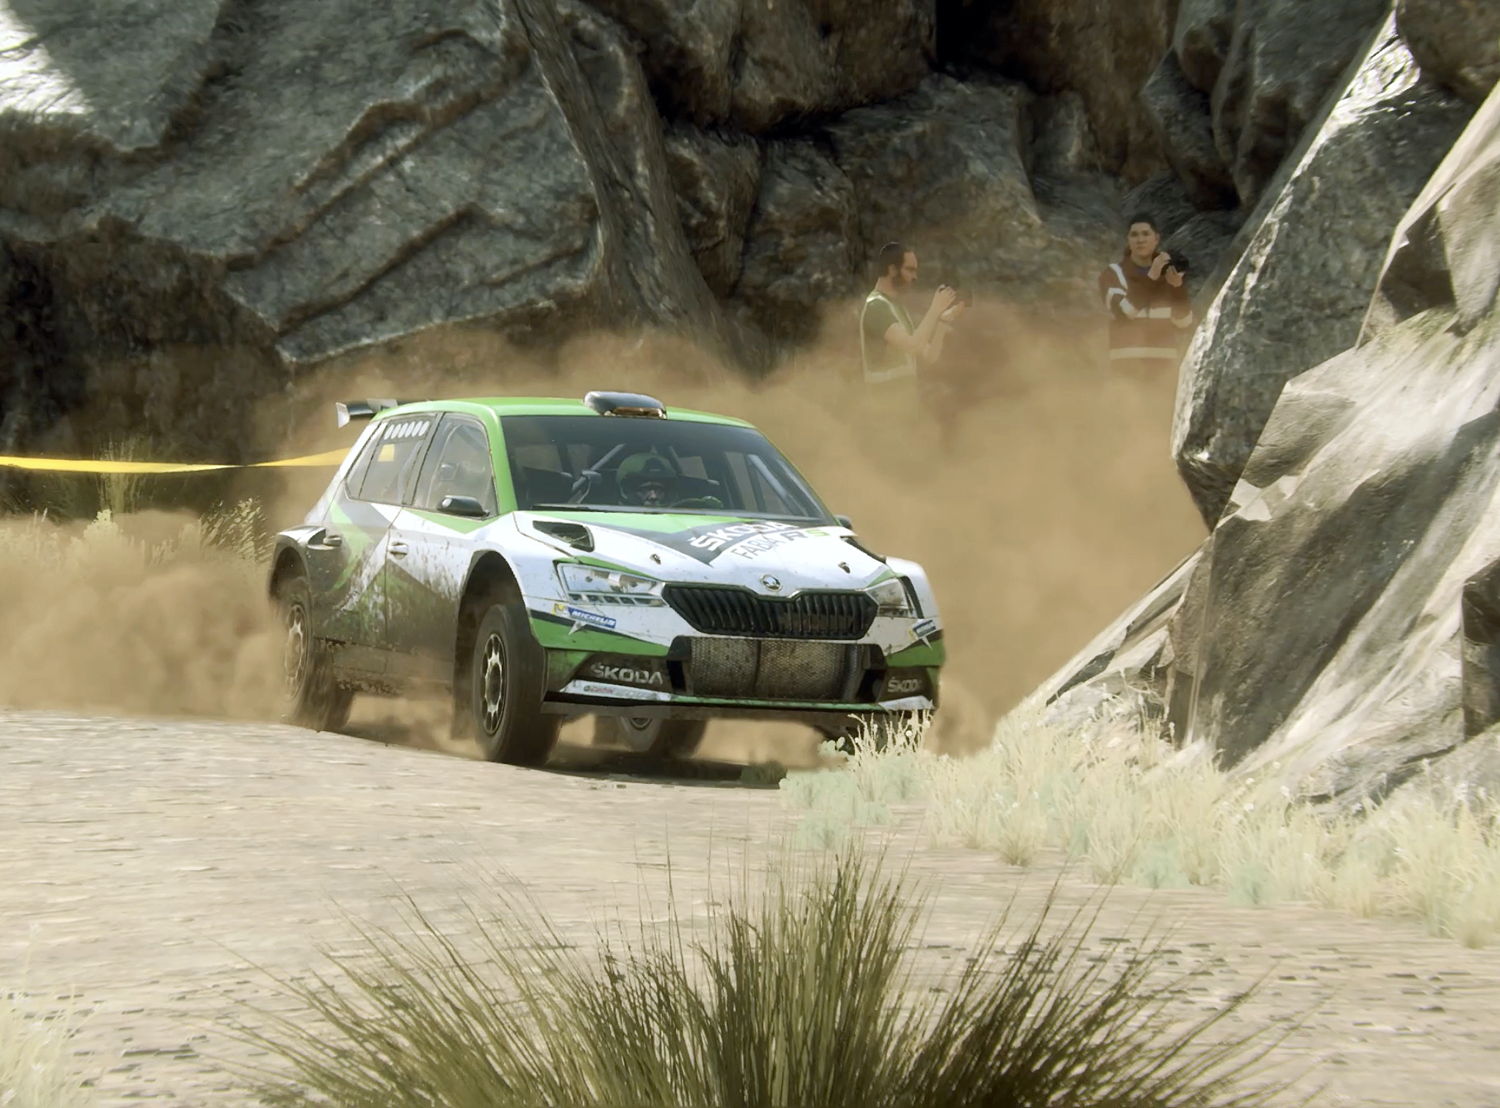 Virtual ŠKODA crews and their cars are present in the DiRT Rally 2.0 online video game, ŠKODA rally cars appear in a photo realistic shape with different designs